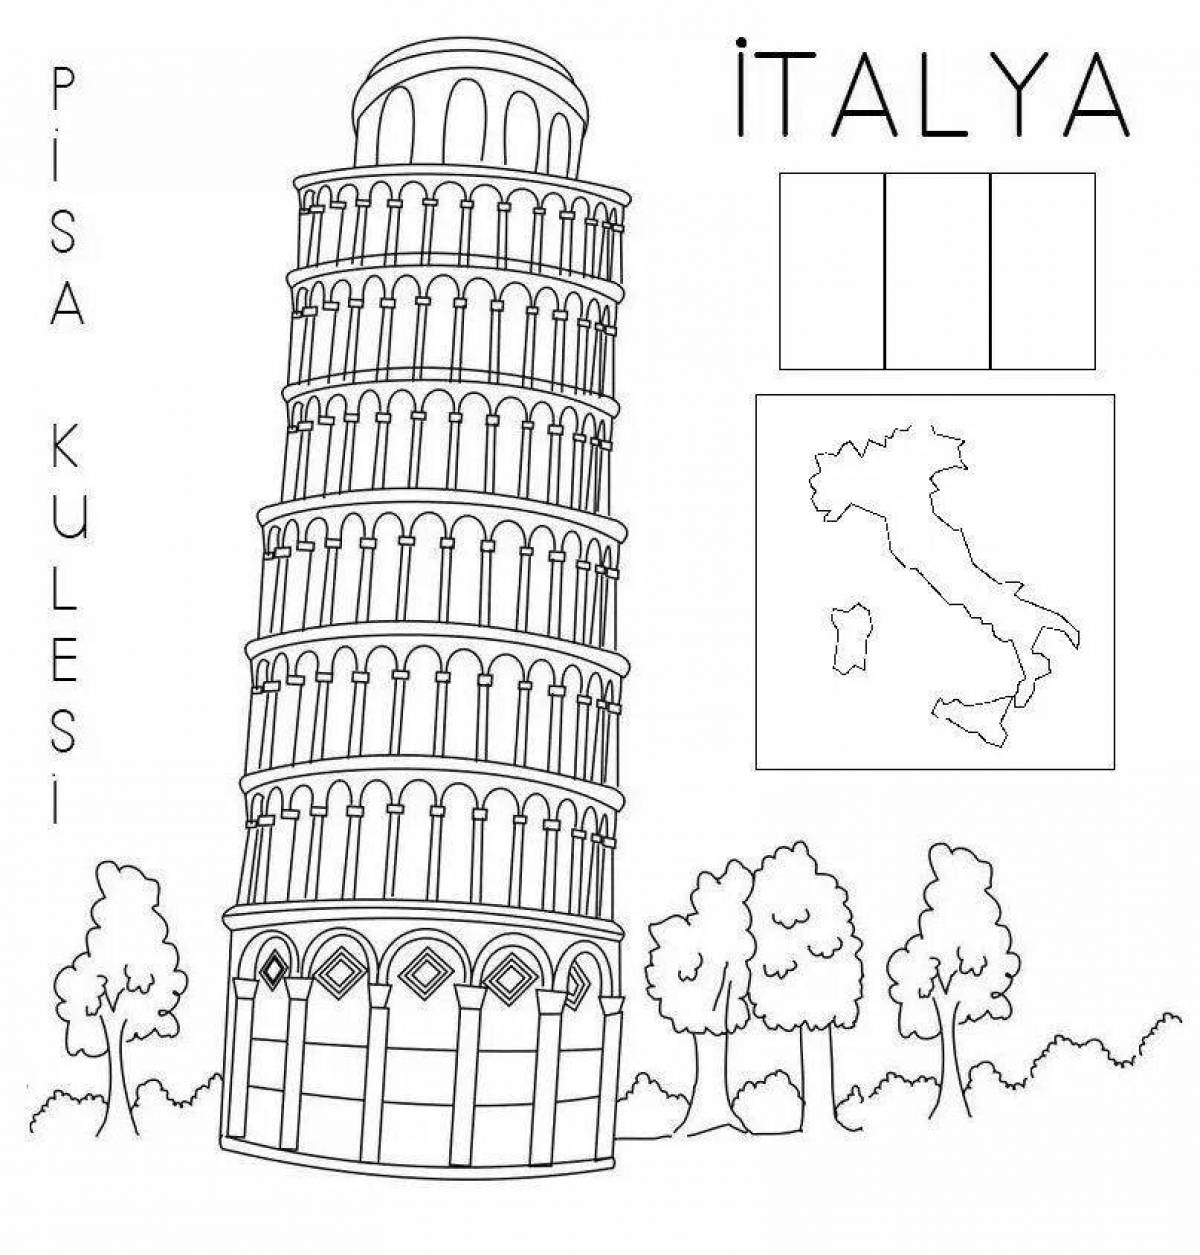 Deluxe coloring of the Leaning Tower of Pisa